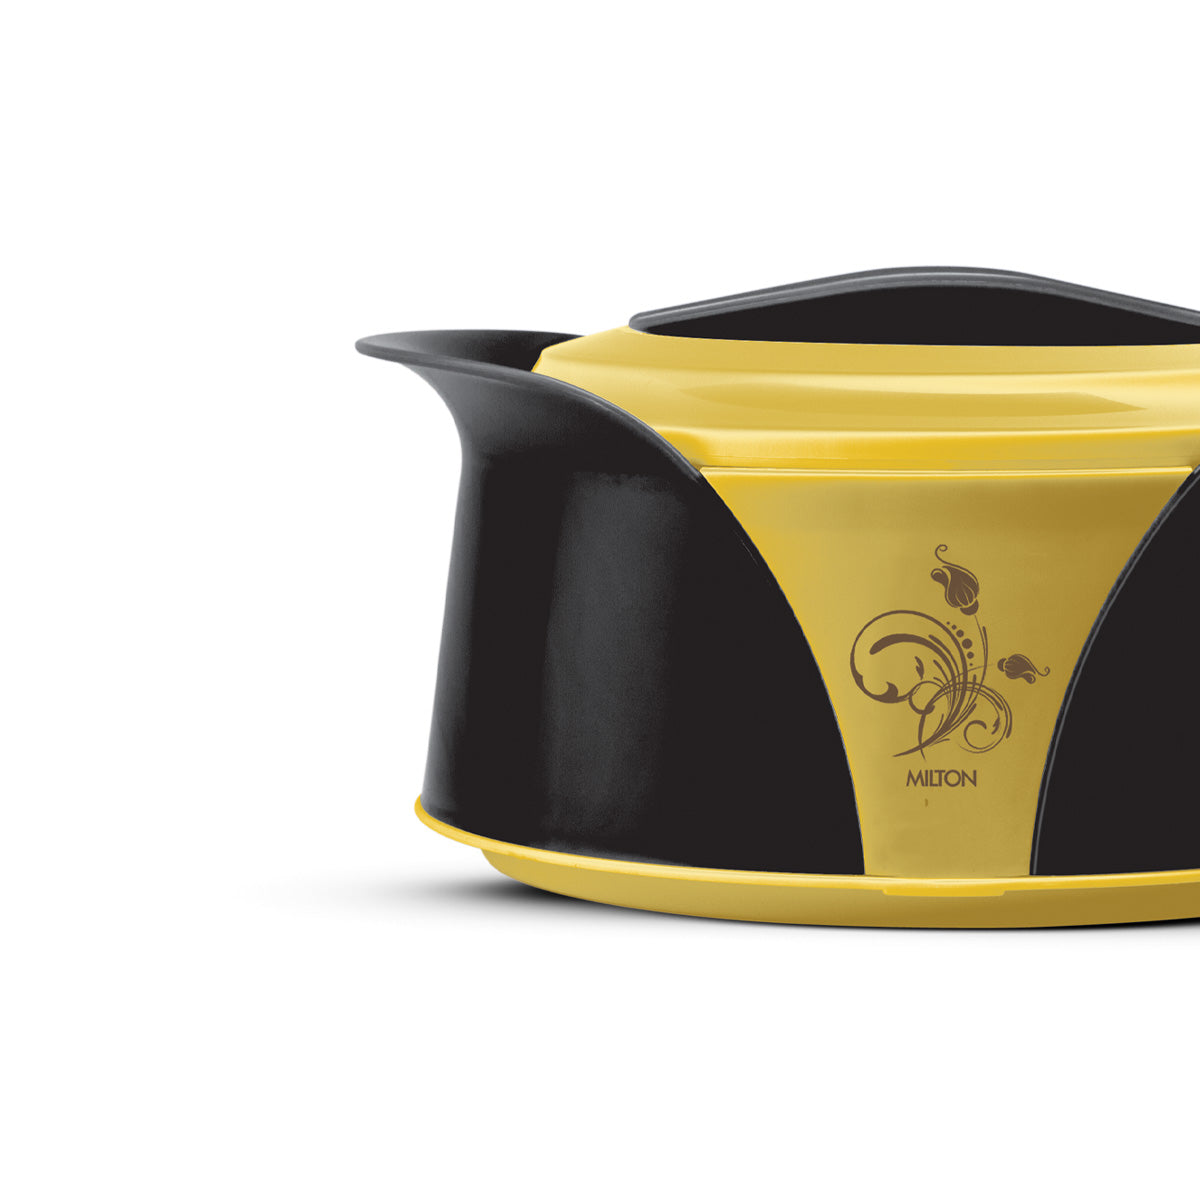 SQ Professional Imperial Insulated Casserole Set 3pc/ Black-Gold